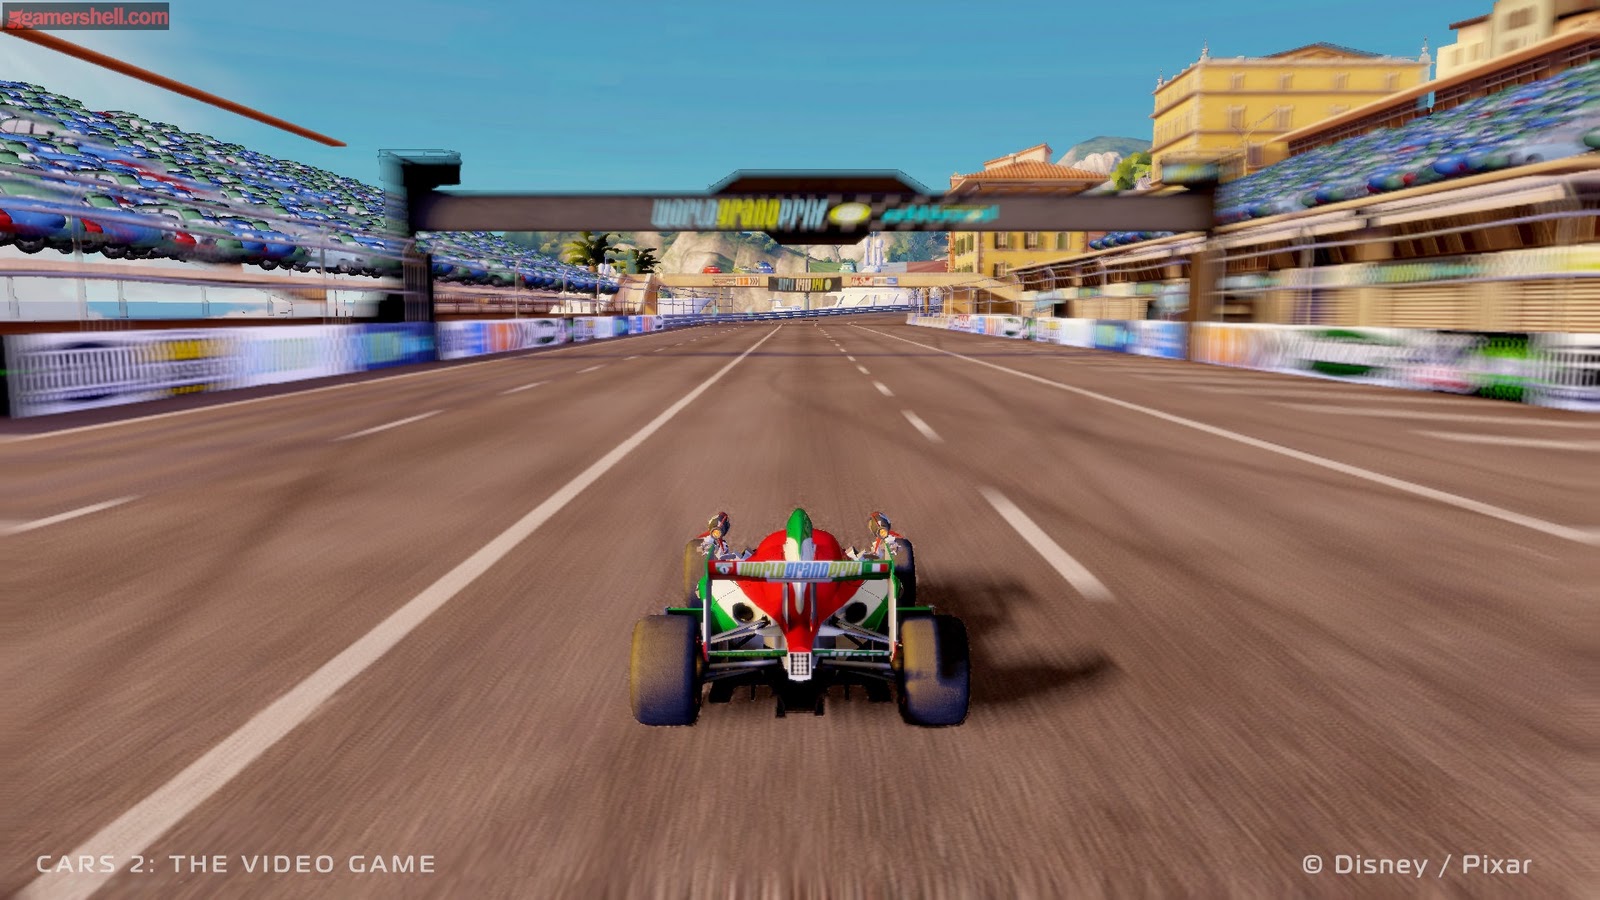 Download Free Cars 2 The Video Game Games - PC Game